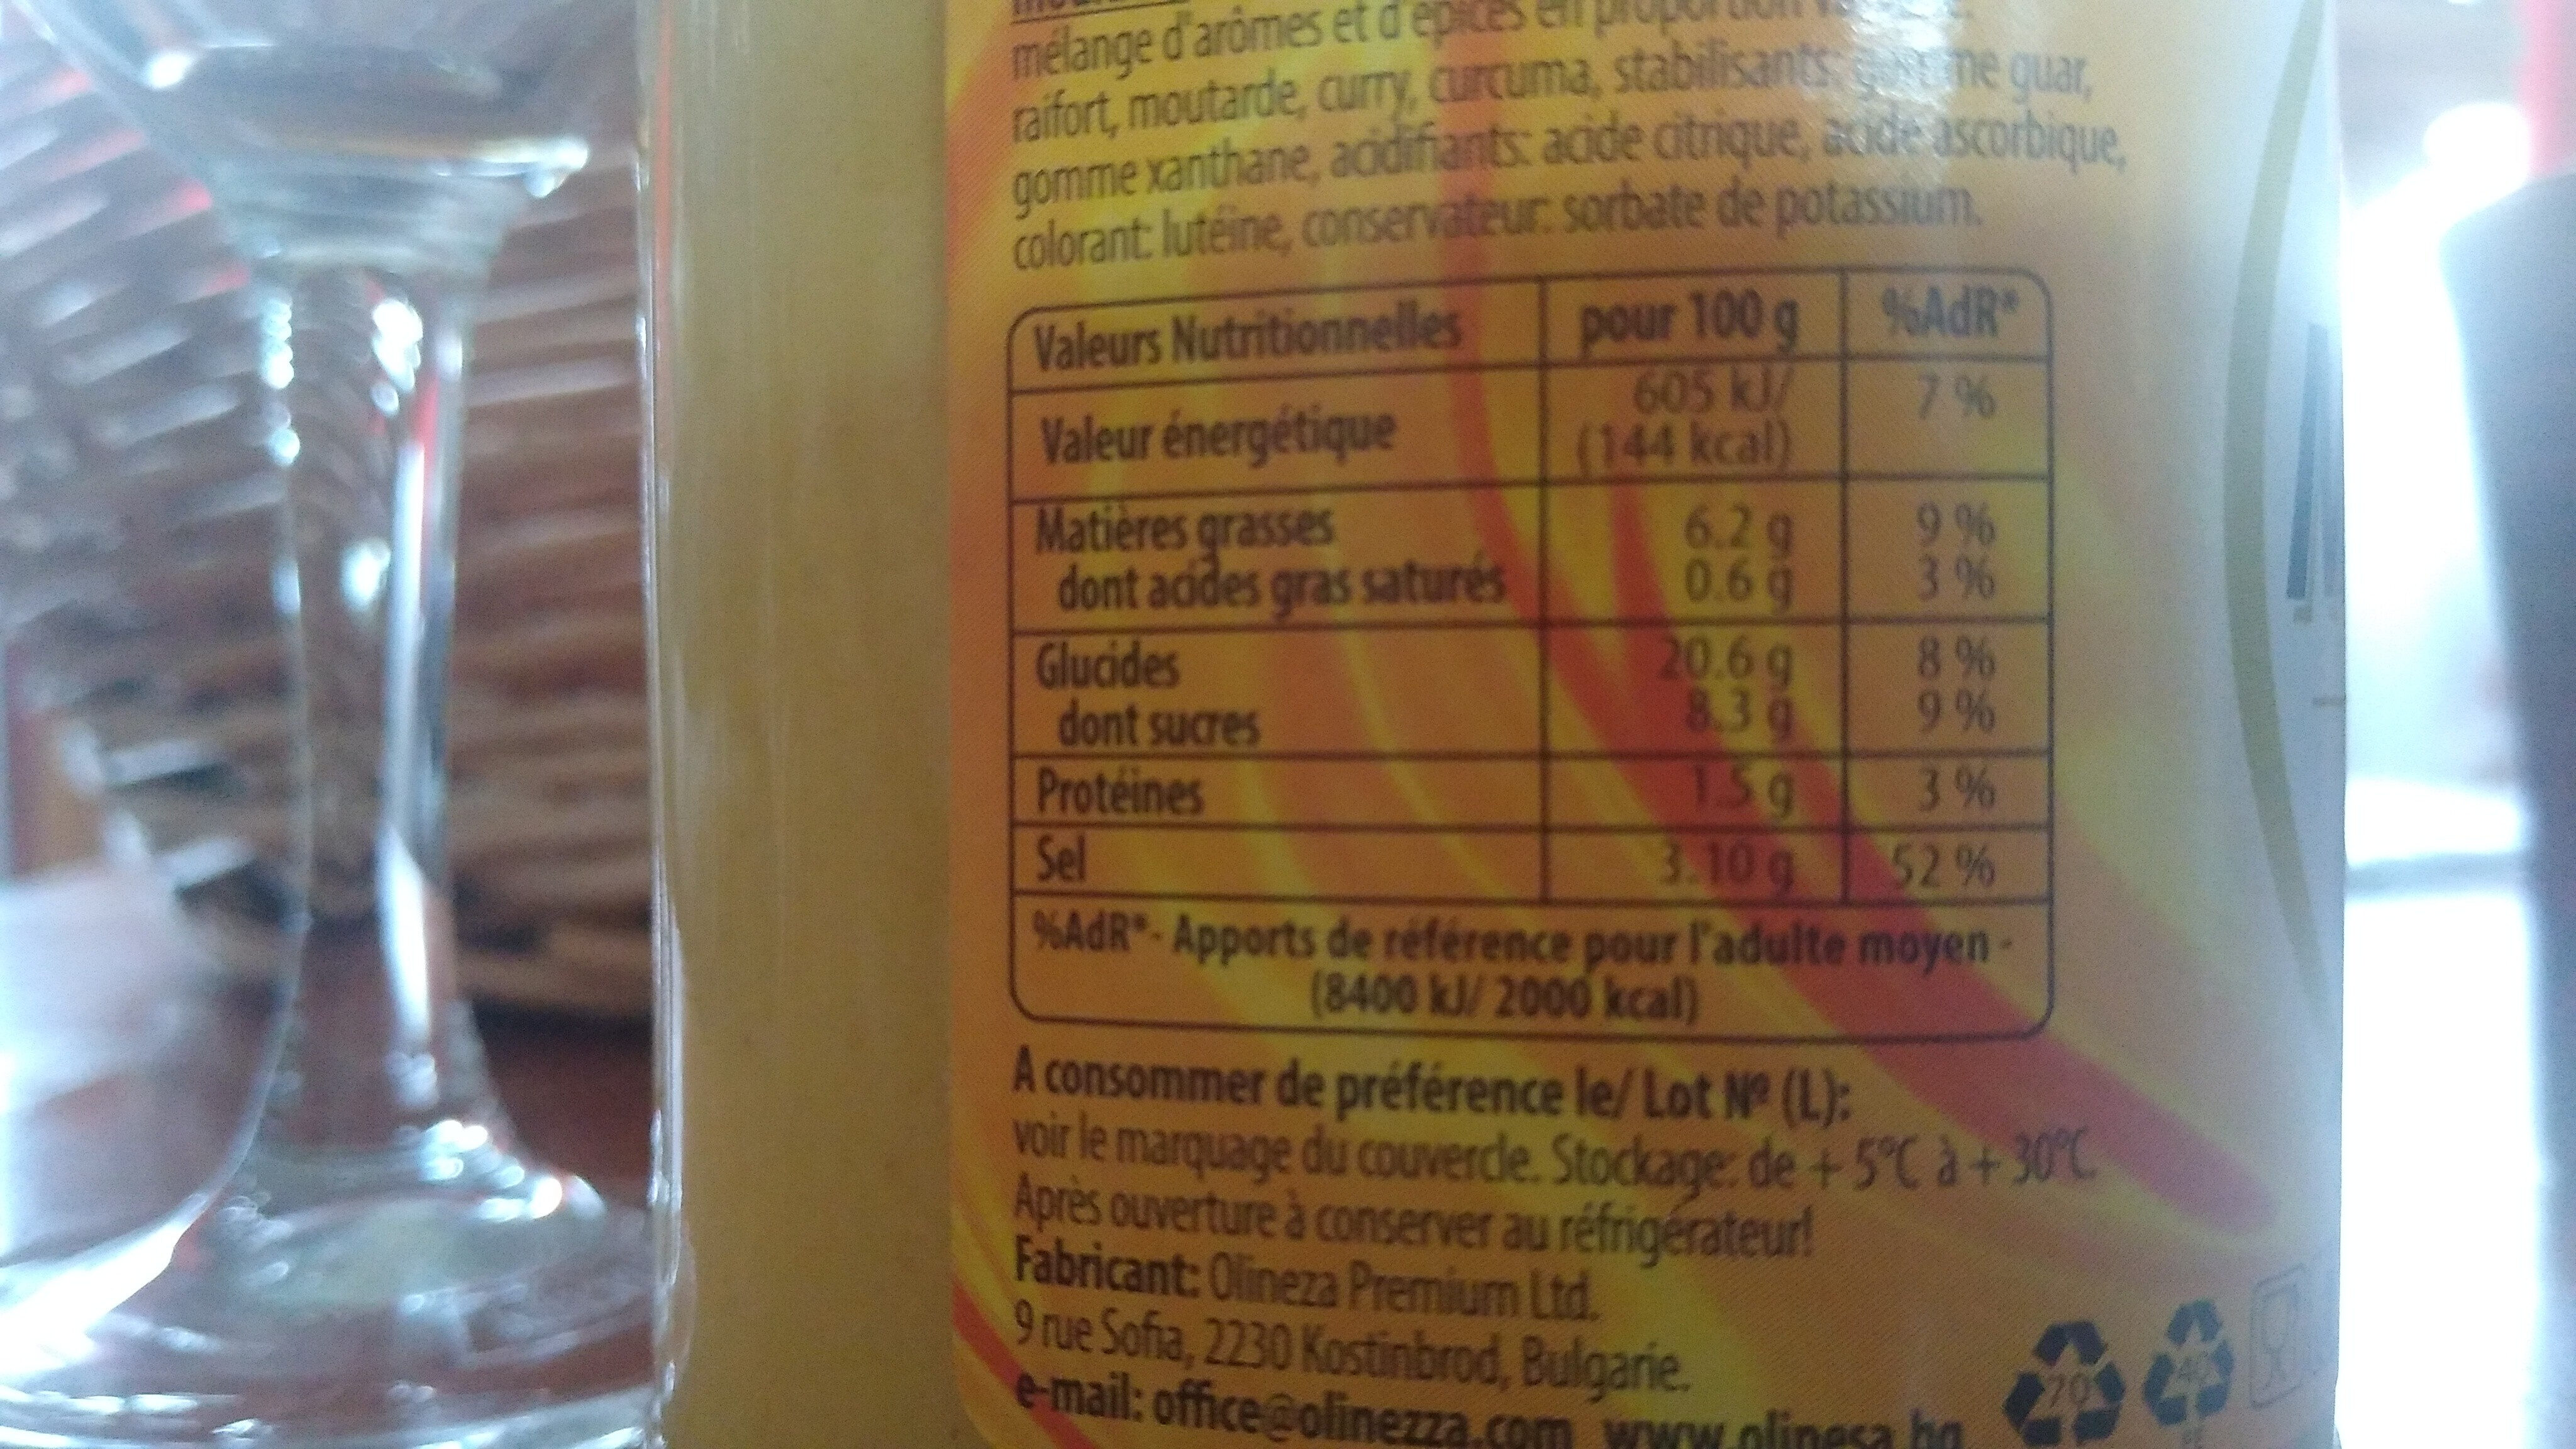 Moutarde fine - Nutrition facts - fr